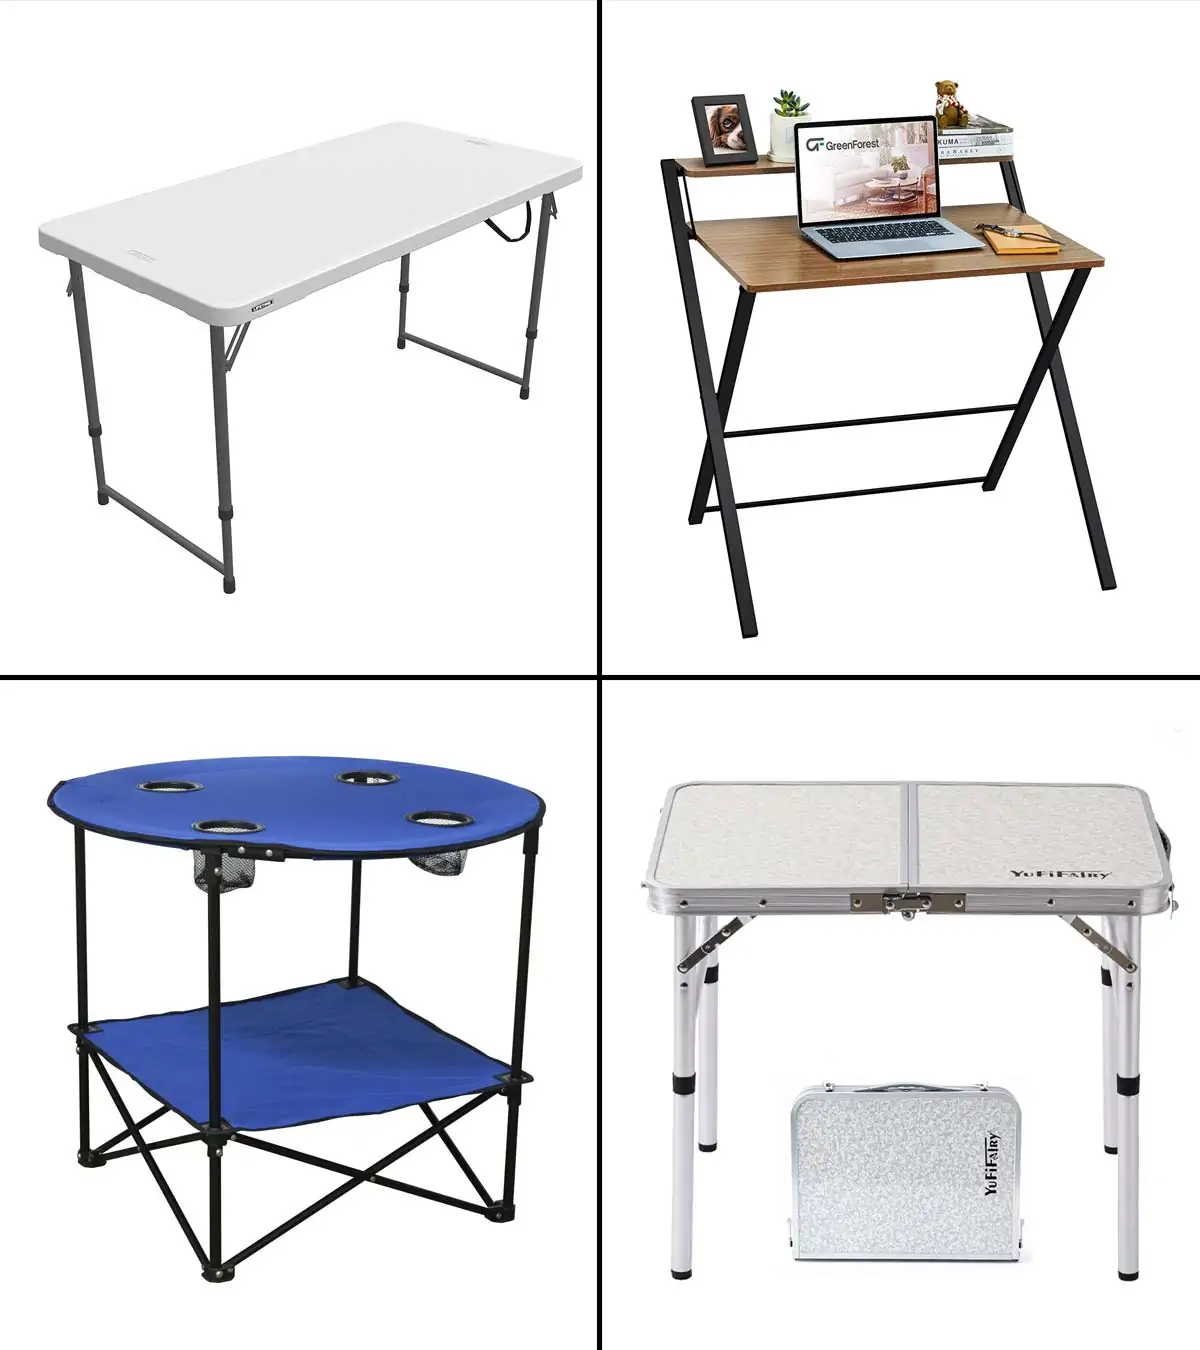 13 Best Foldable Tables To Buy In 2021